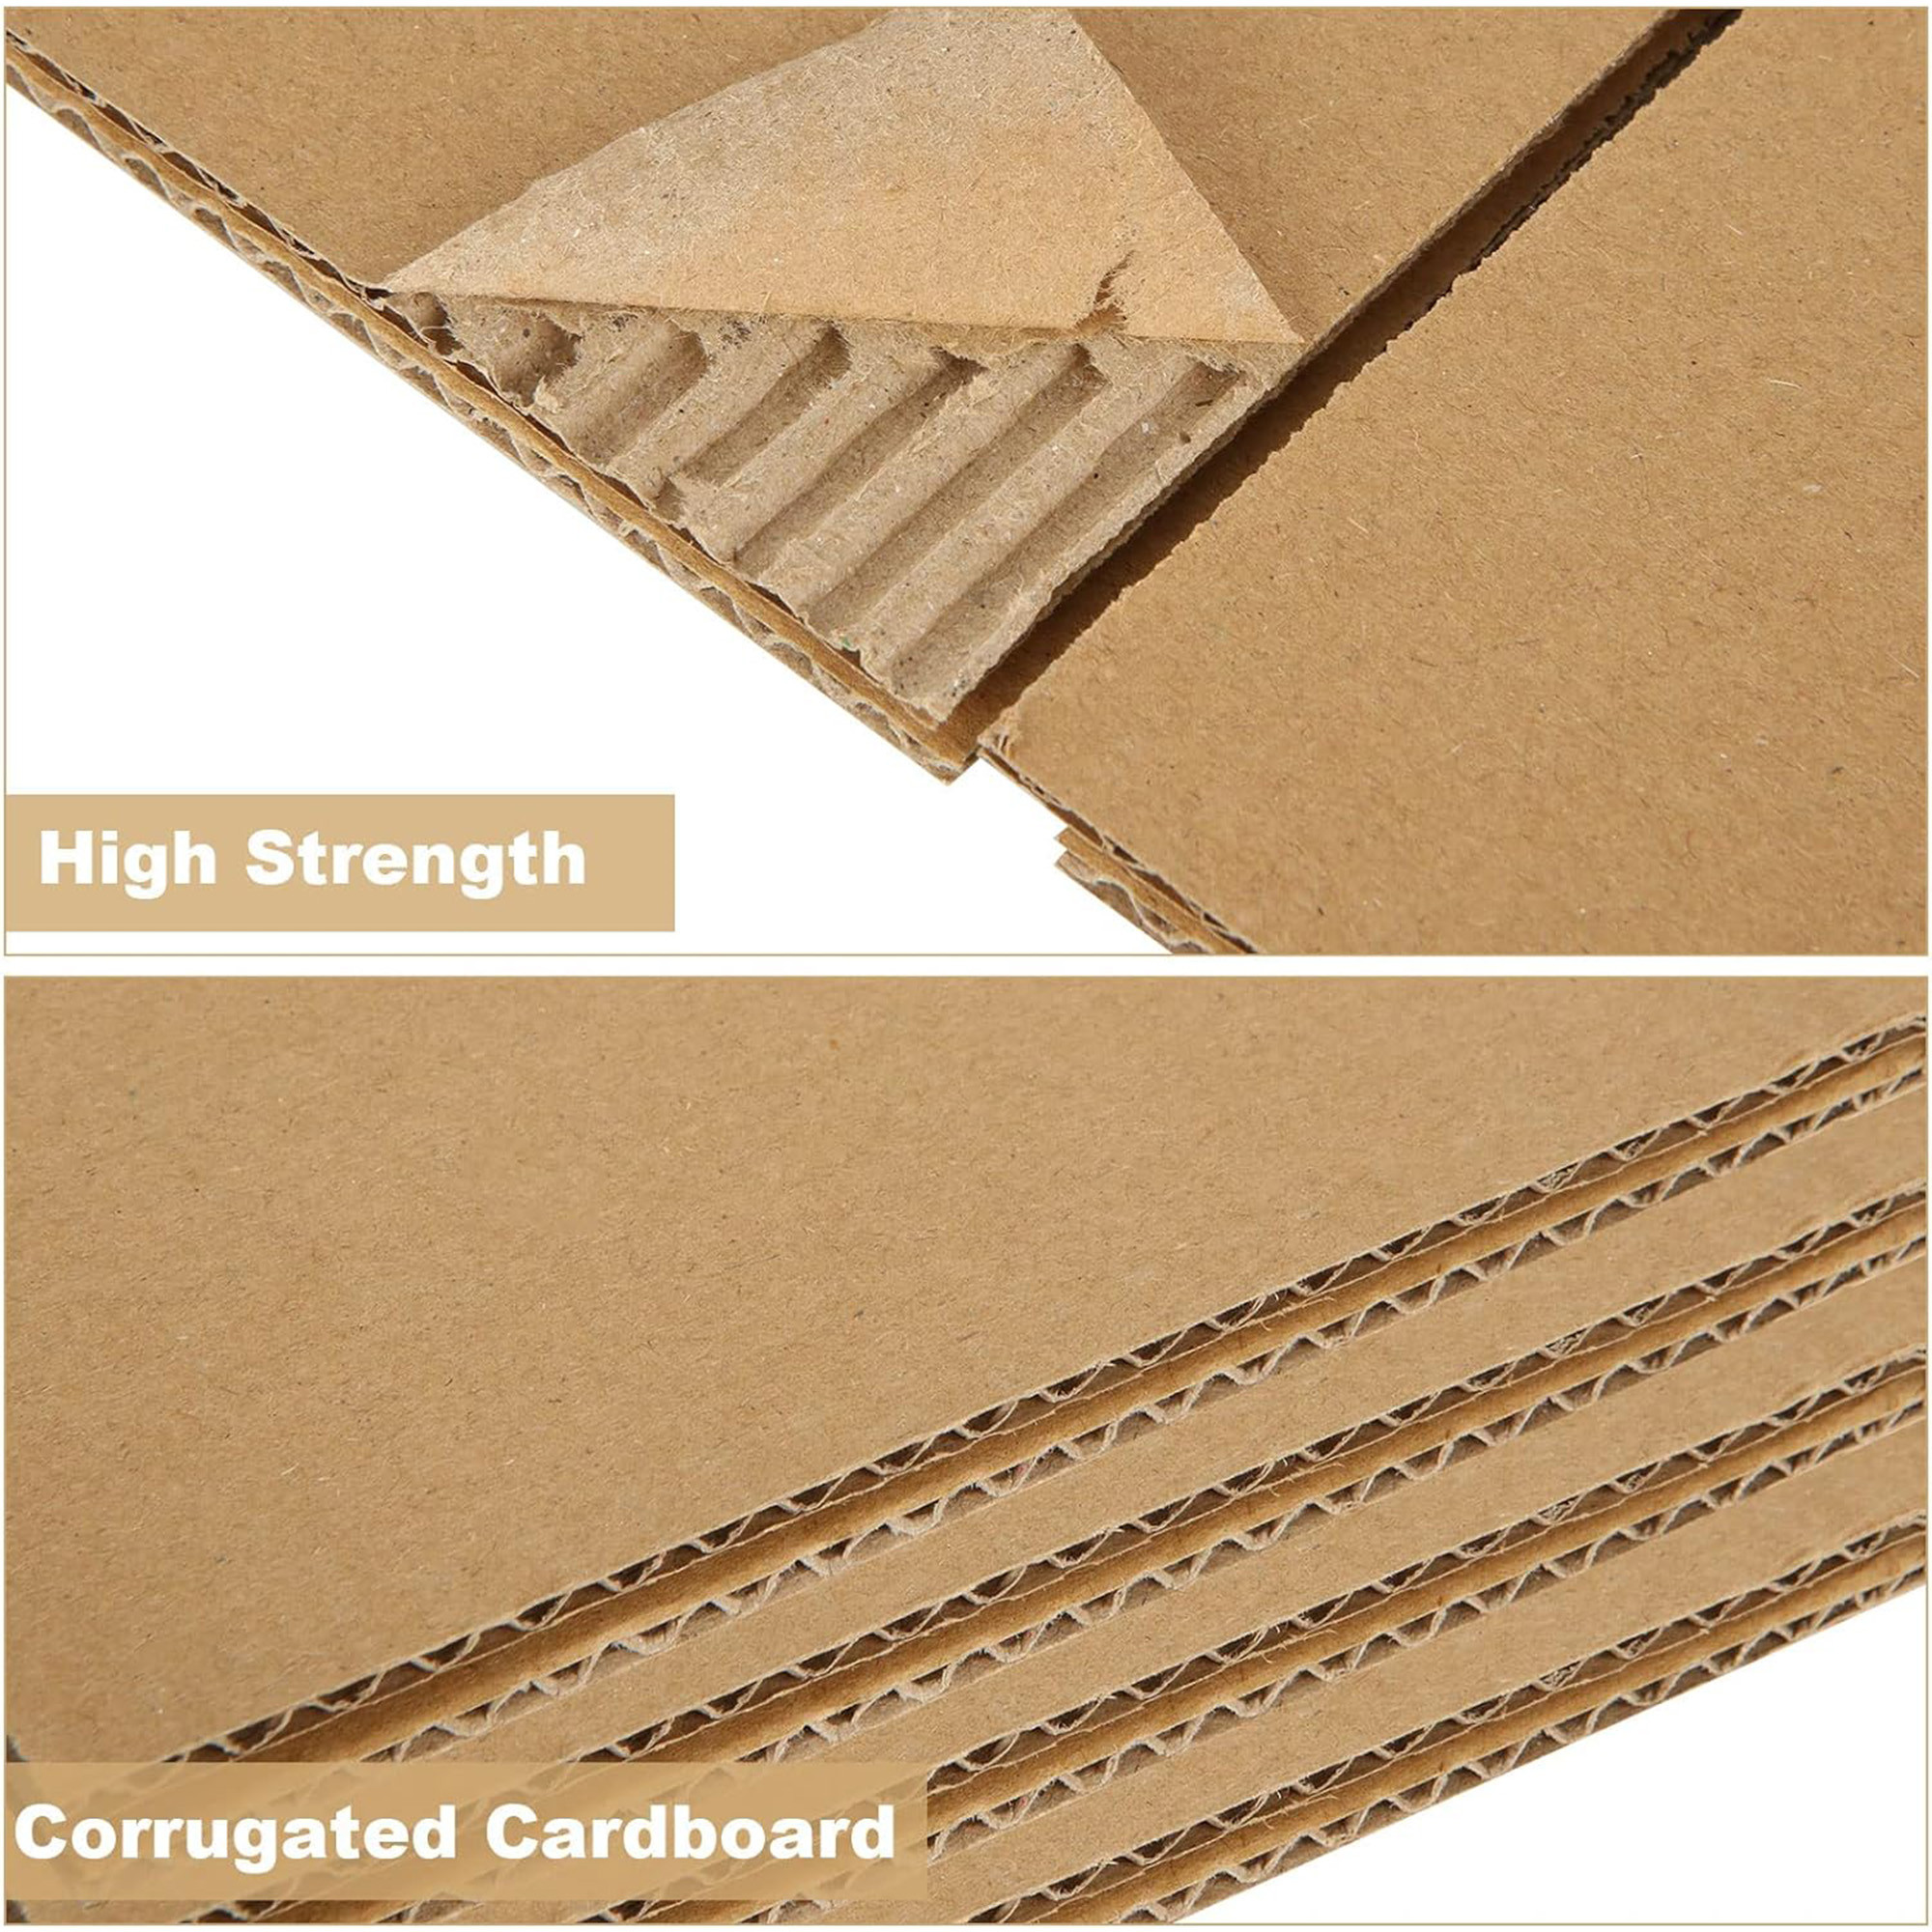 Kuber Industries Corrugated Box | 3 Ply Corrugated Packing Box | Corrugated for Shipping | Corrugated for Courier & Goods Transportation | L 10 x W 7.6 x H 7.1 Inch | Brown